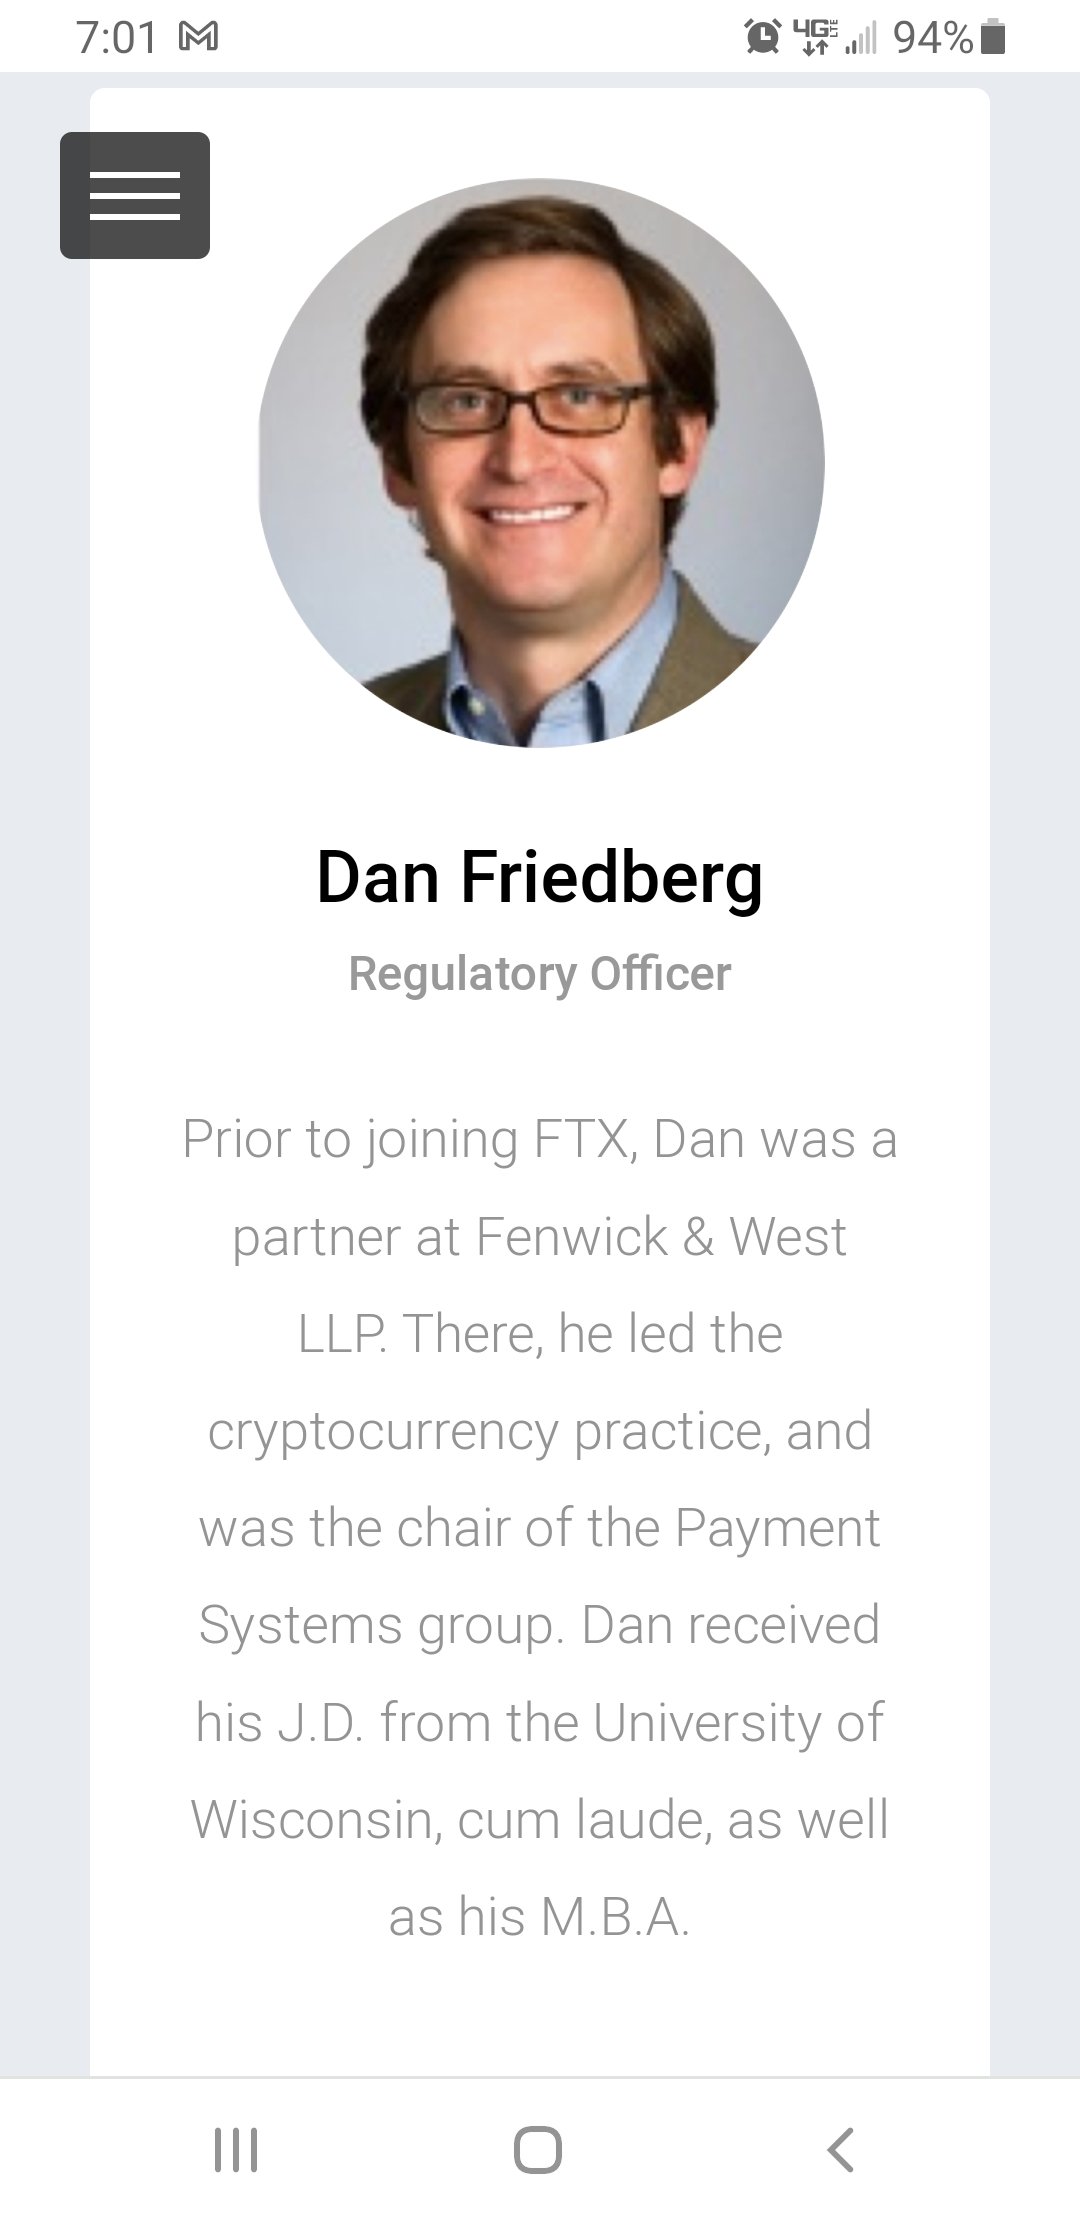 Cliff Josephy on Twitter: "Anyone know if FTX Regulatory Officer is the  same Dan Friedberg who was an attorney at Ultimate Bet during its cheating  scandal? If so, surprising that tidbit was